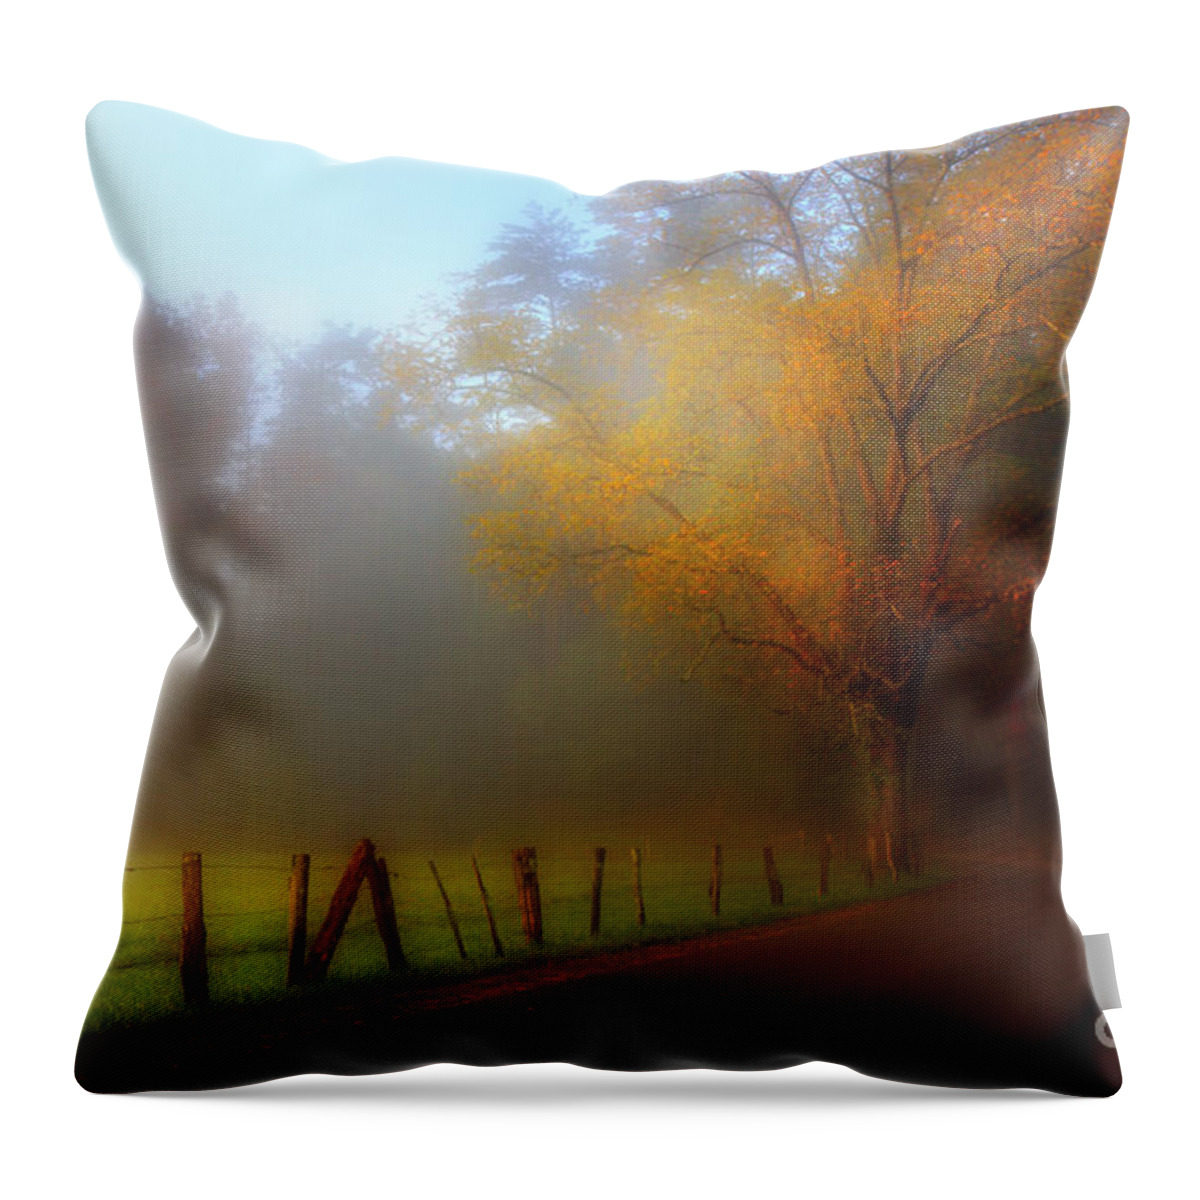 Cades Cove Throw Pillow featuring the photograph October And Fog by Michael Eingle